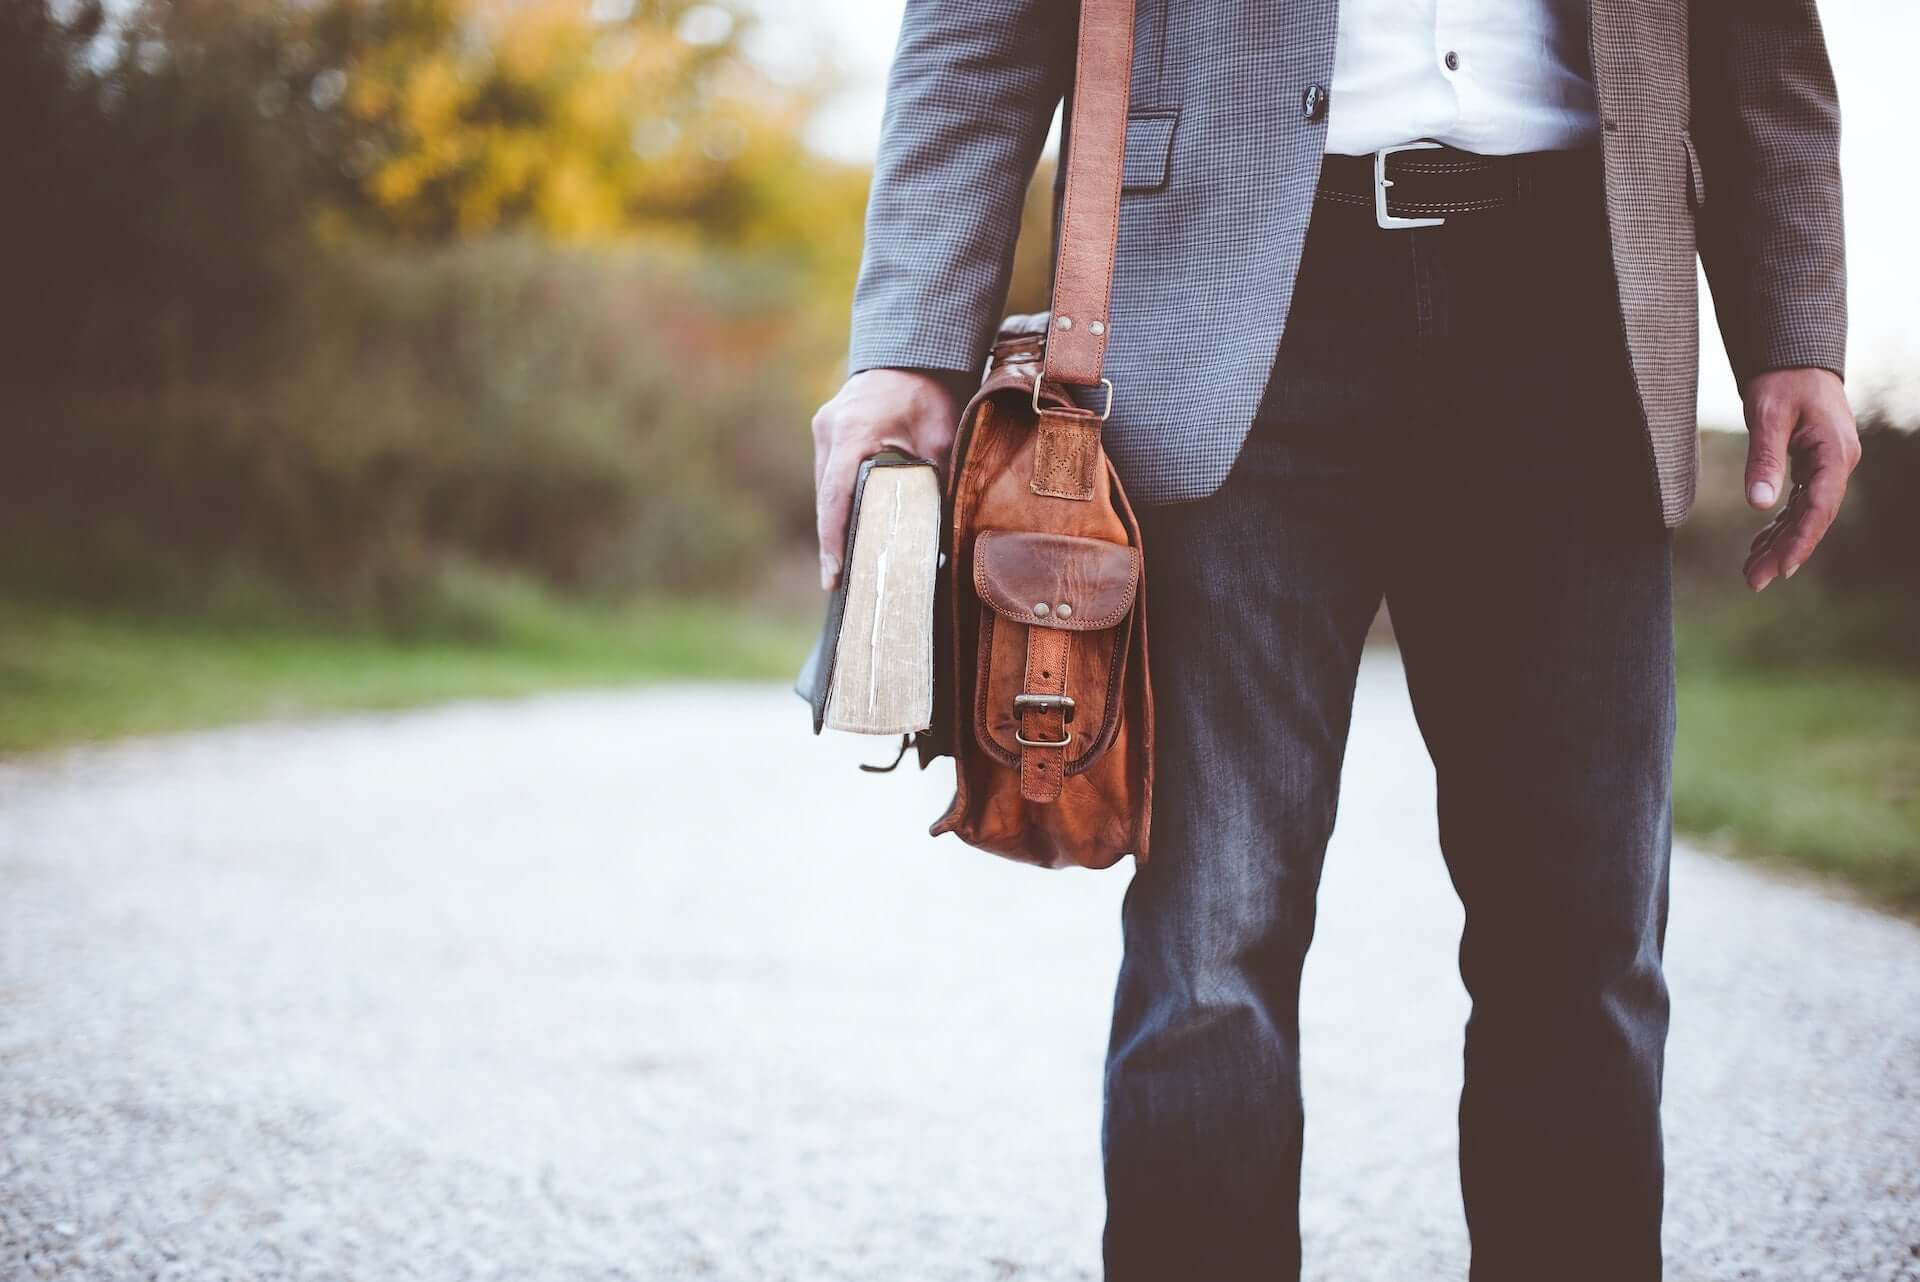 A man in a business outfit carries a briefcase and a book.